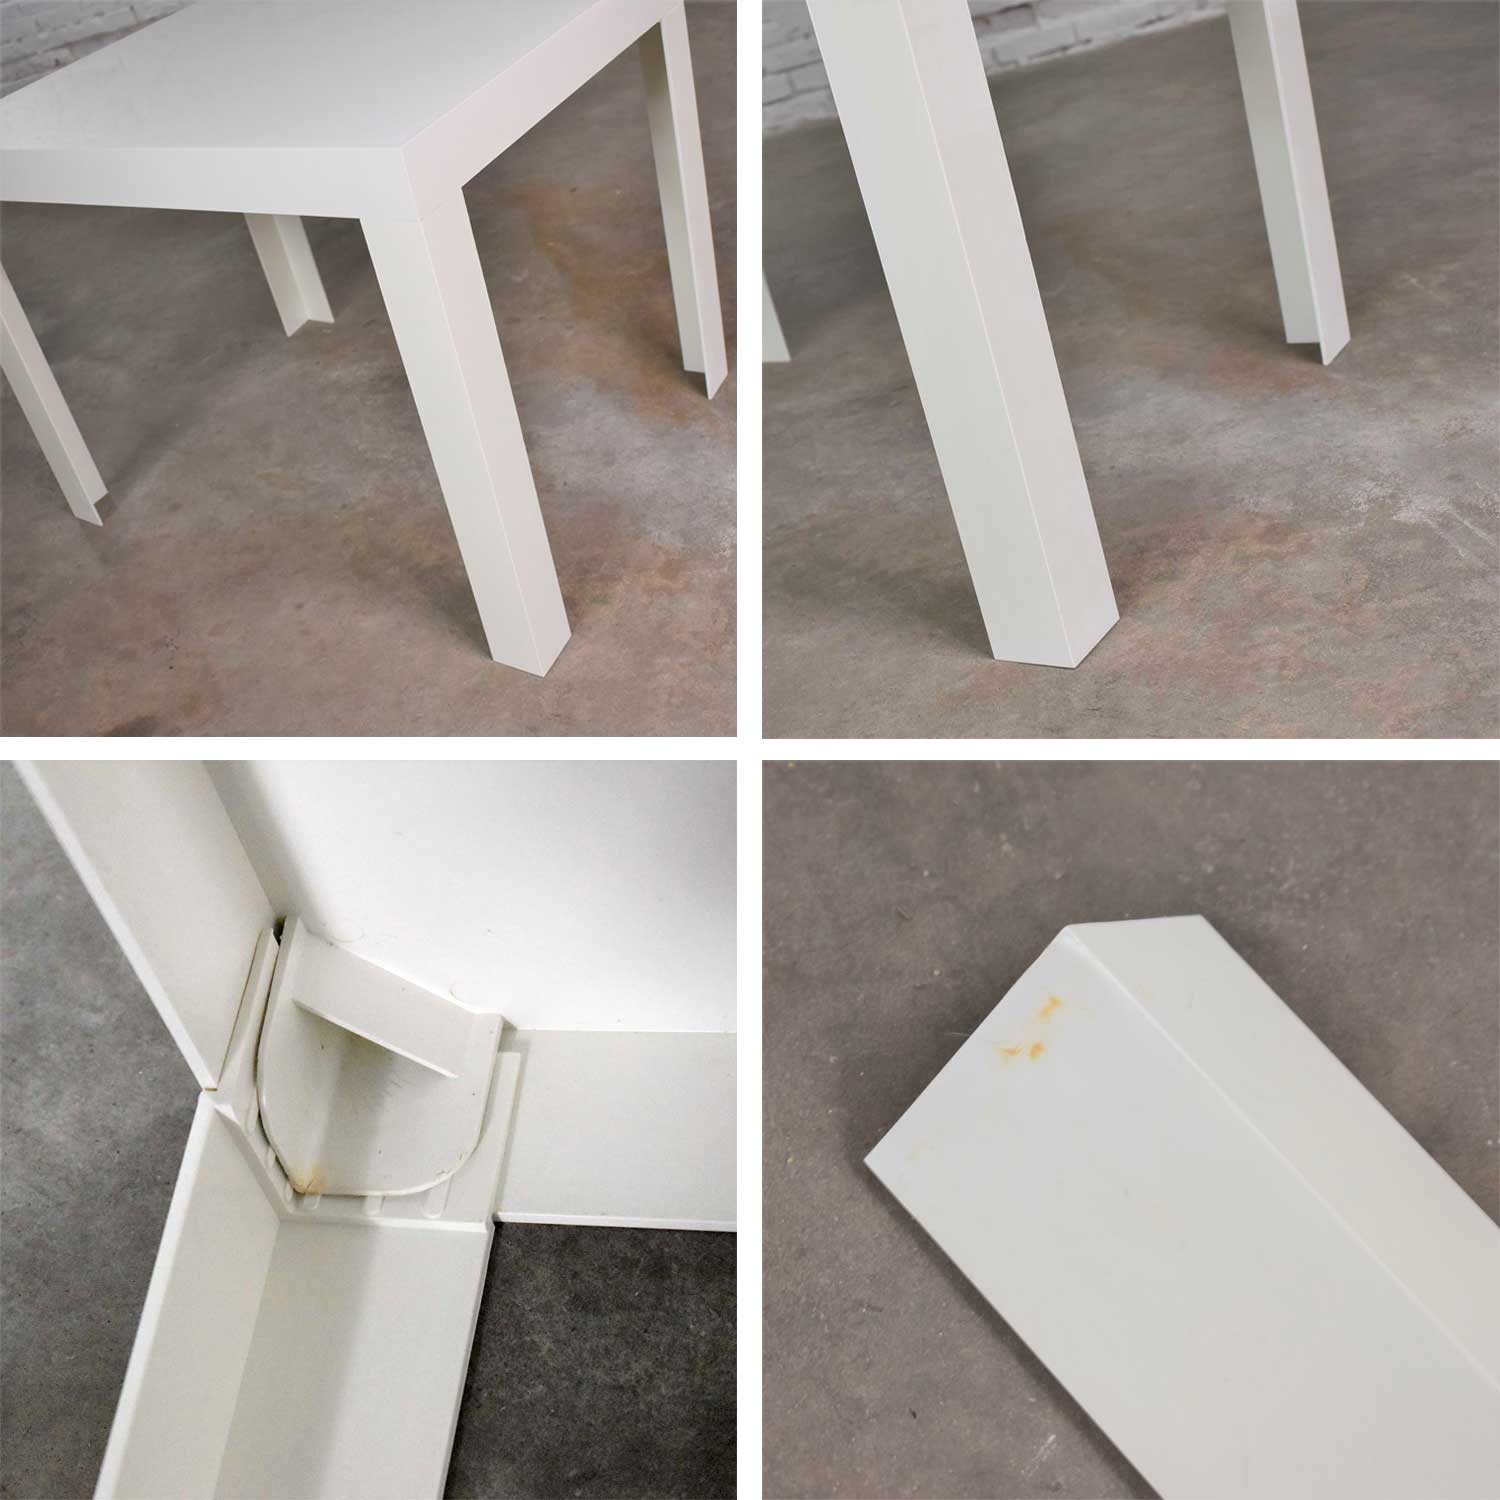 Vintage Modern White Molded Plastic Rectangular Parsons Style Side Table Style Syroco or Kartell